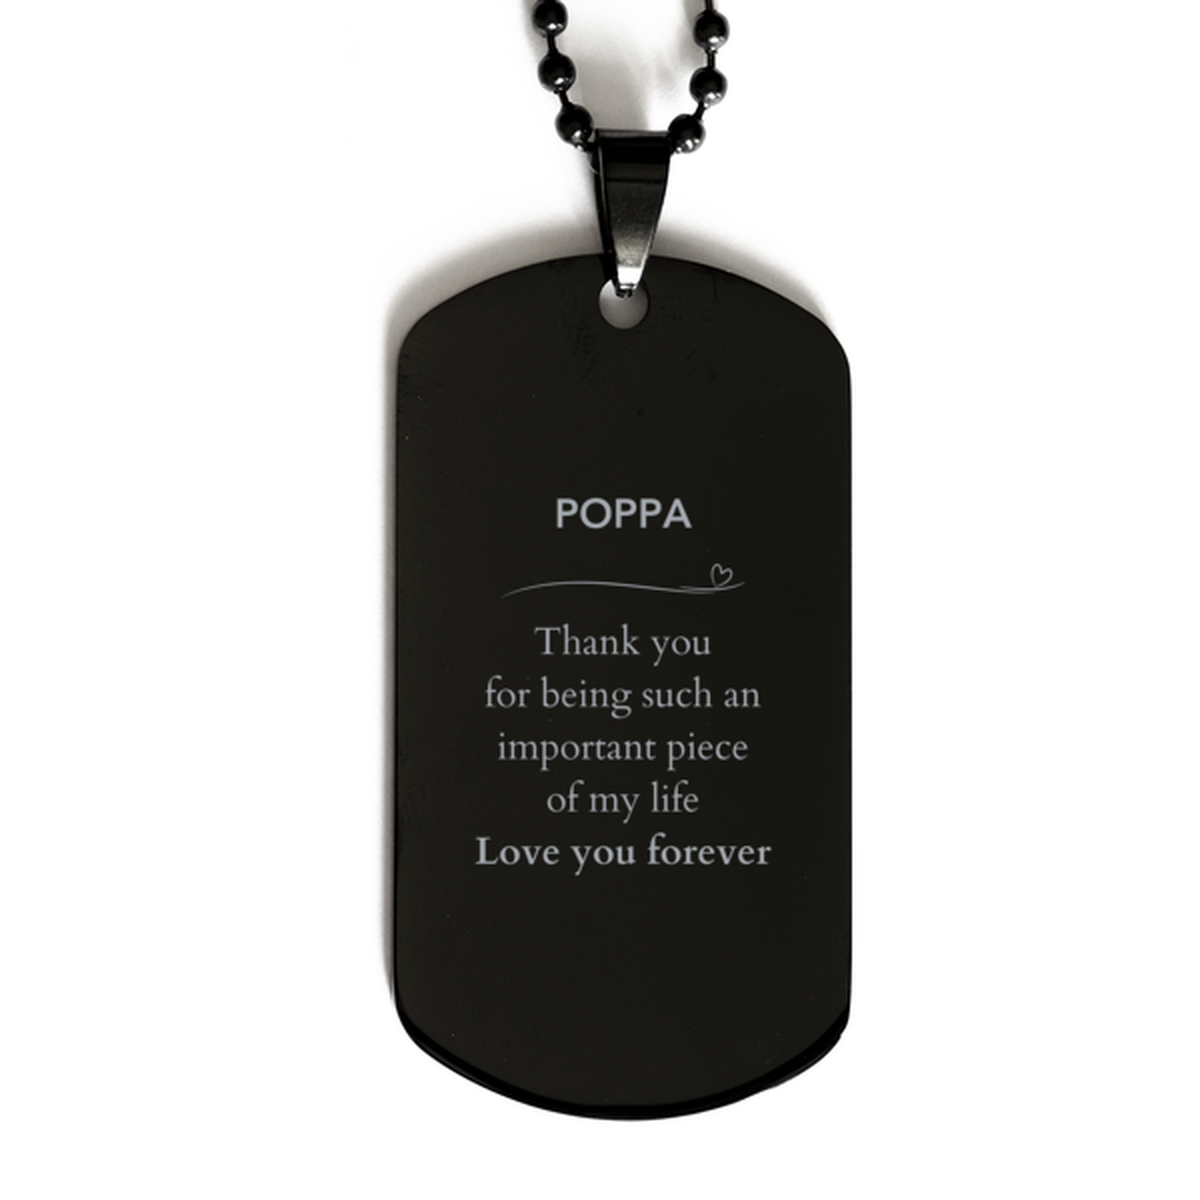 Appropriate Poppa Black Dog Tag Epic Birthday Gifts for Poppa Thank you for being such an important piece of my life Poppa Christmas Mothers Fathers Day